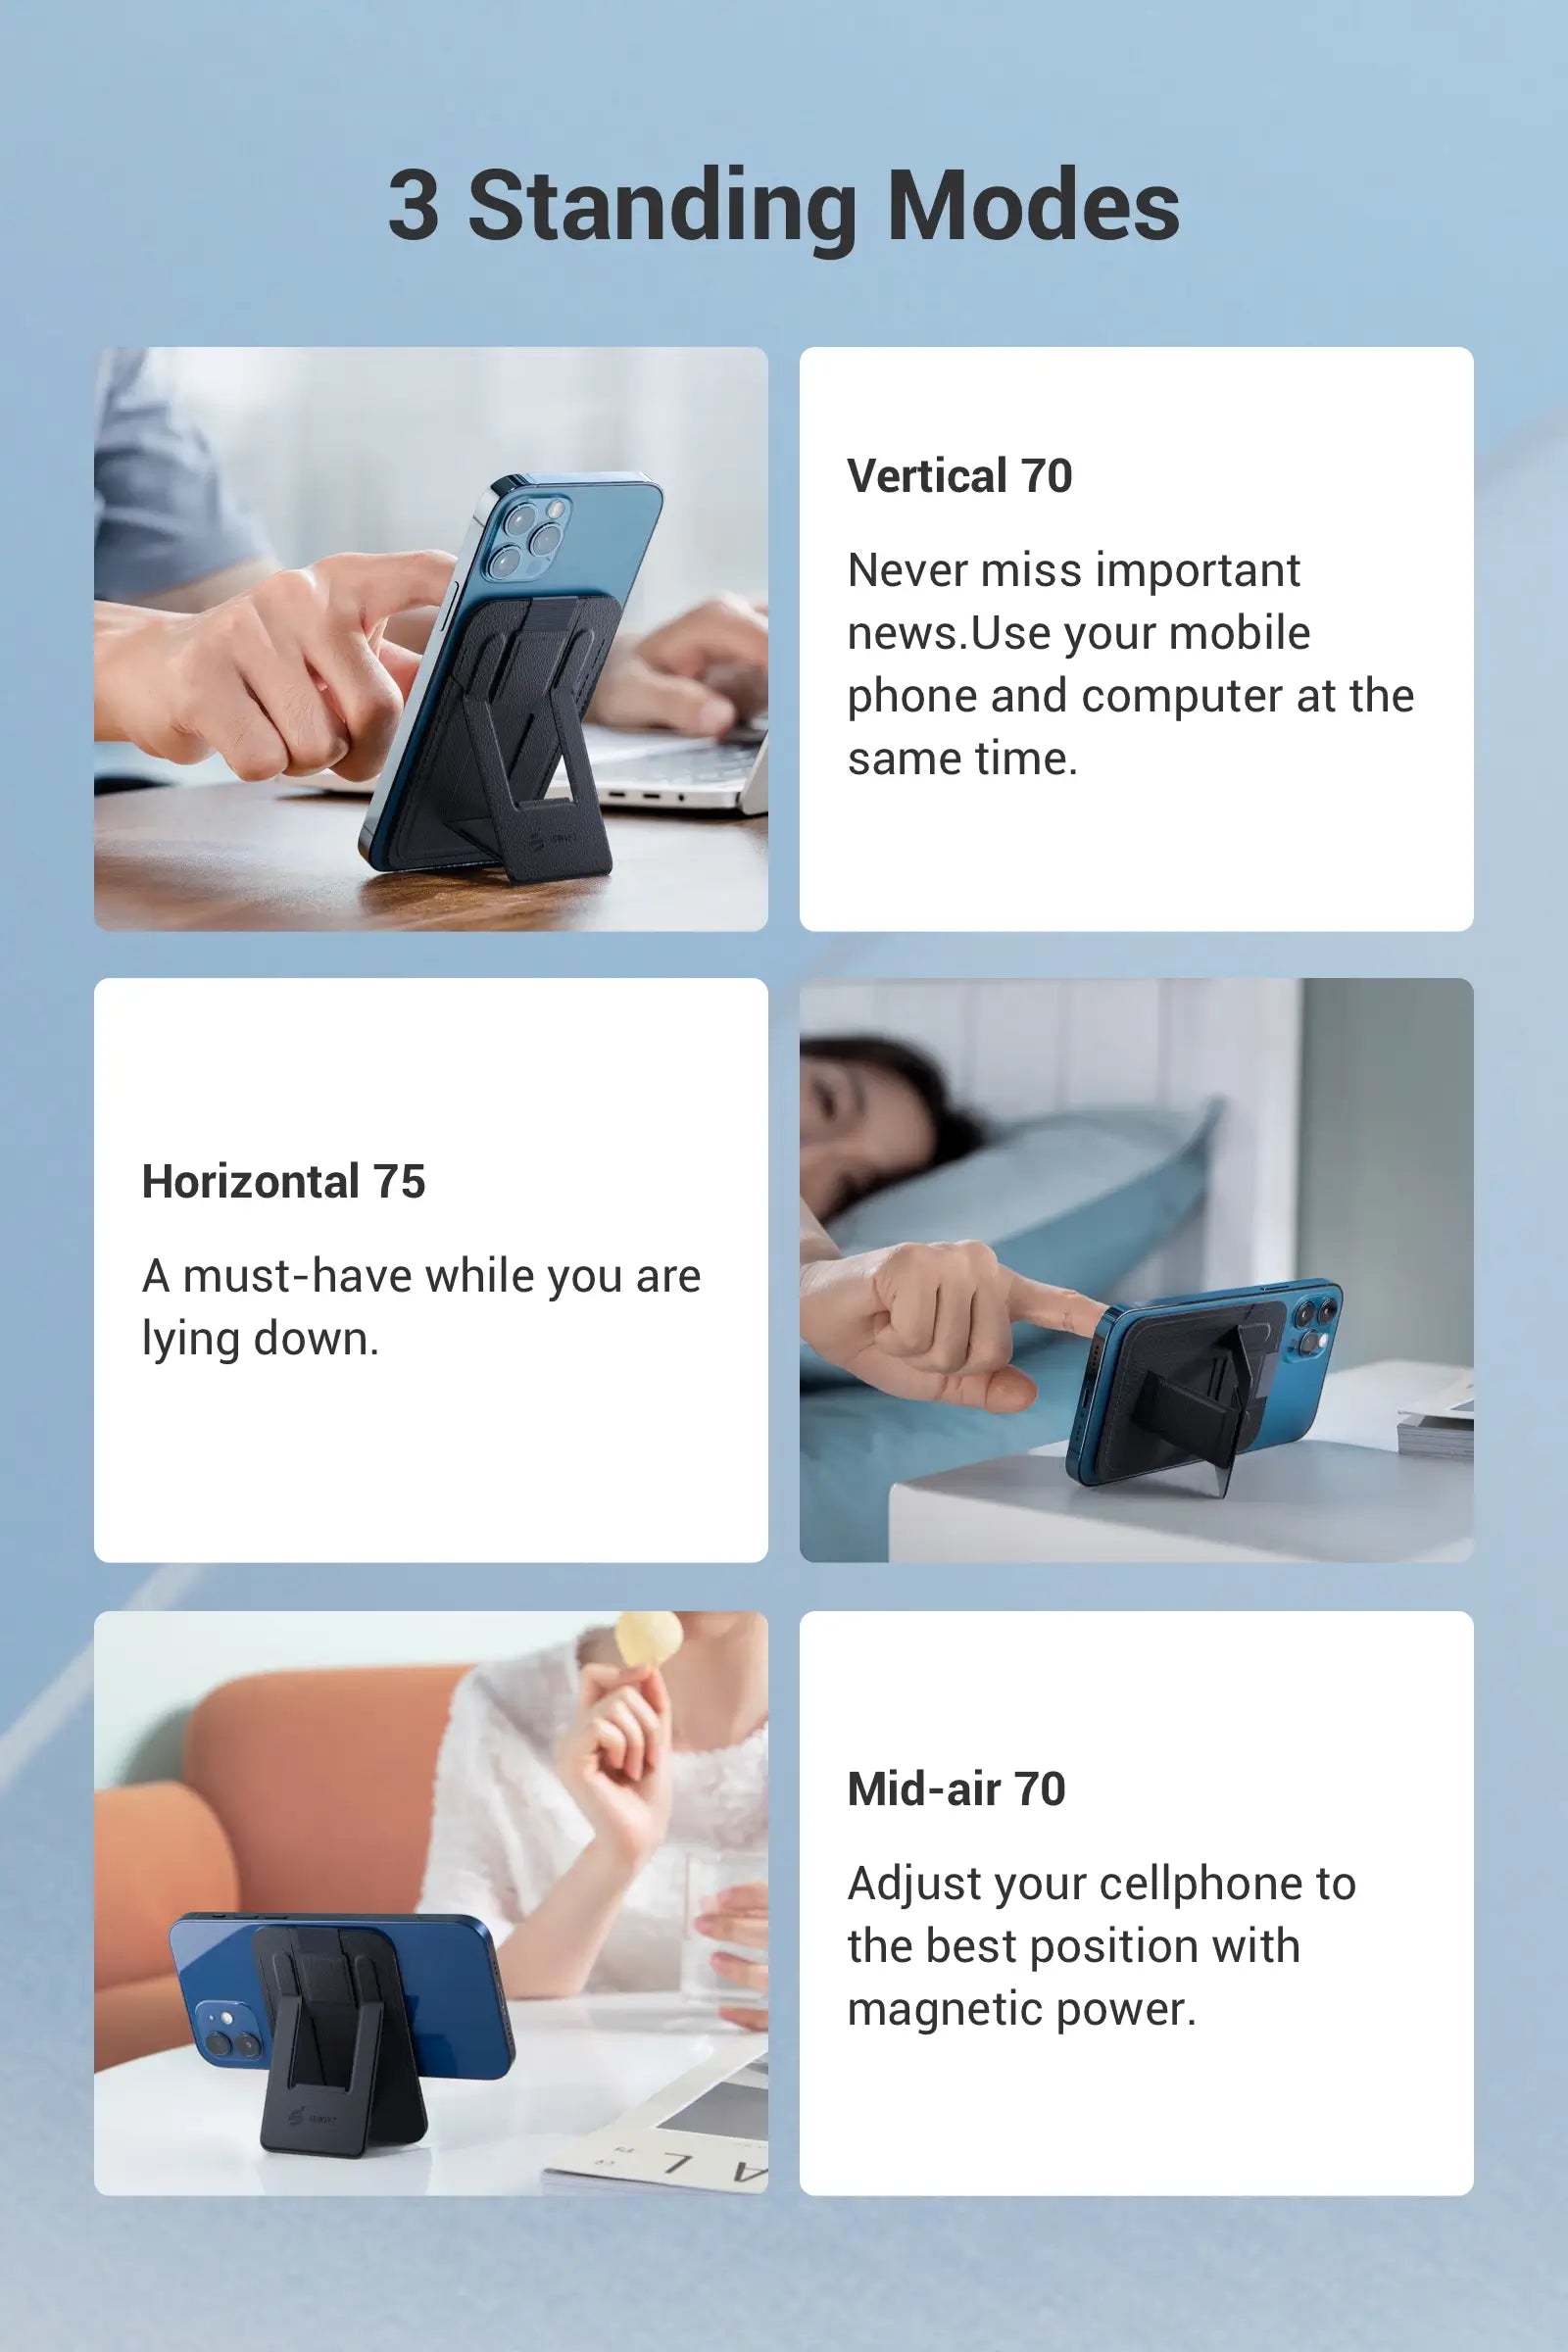 Vertical 70° Never miss important news. Use your mobile phone and computer at the same time. Horizon 75°  A must-have while you are lying down. Float 70° Adjust your cellphone to the best position with magnetic power.